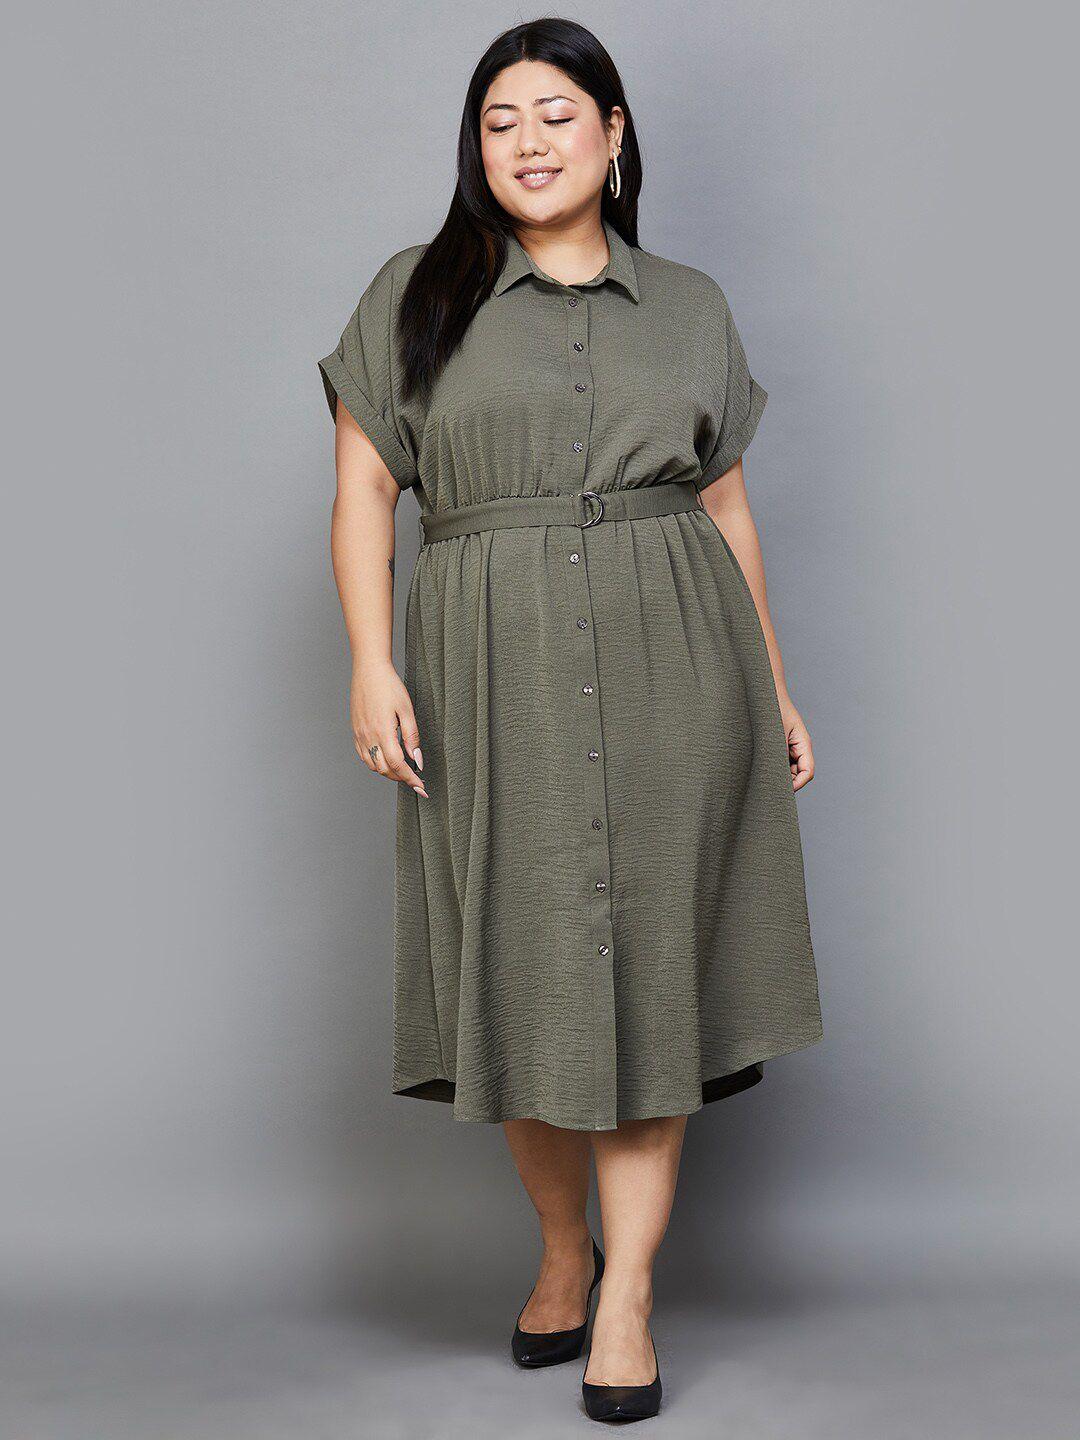 nexus by lifestyle plus size extended sleeves shirt style midi dress